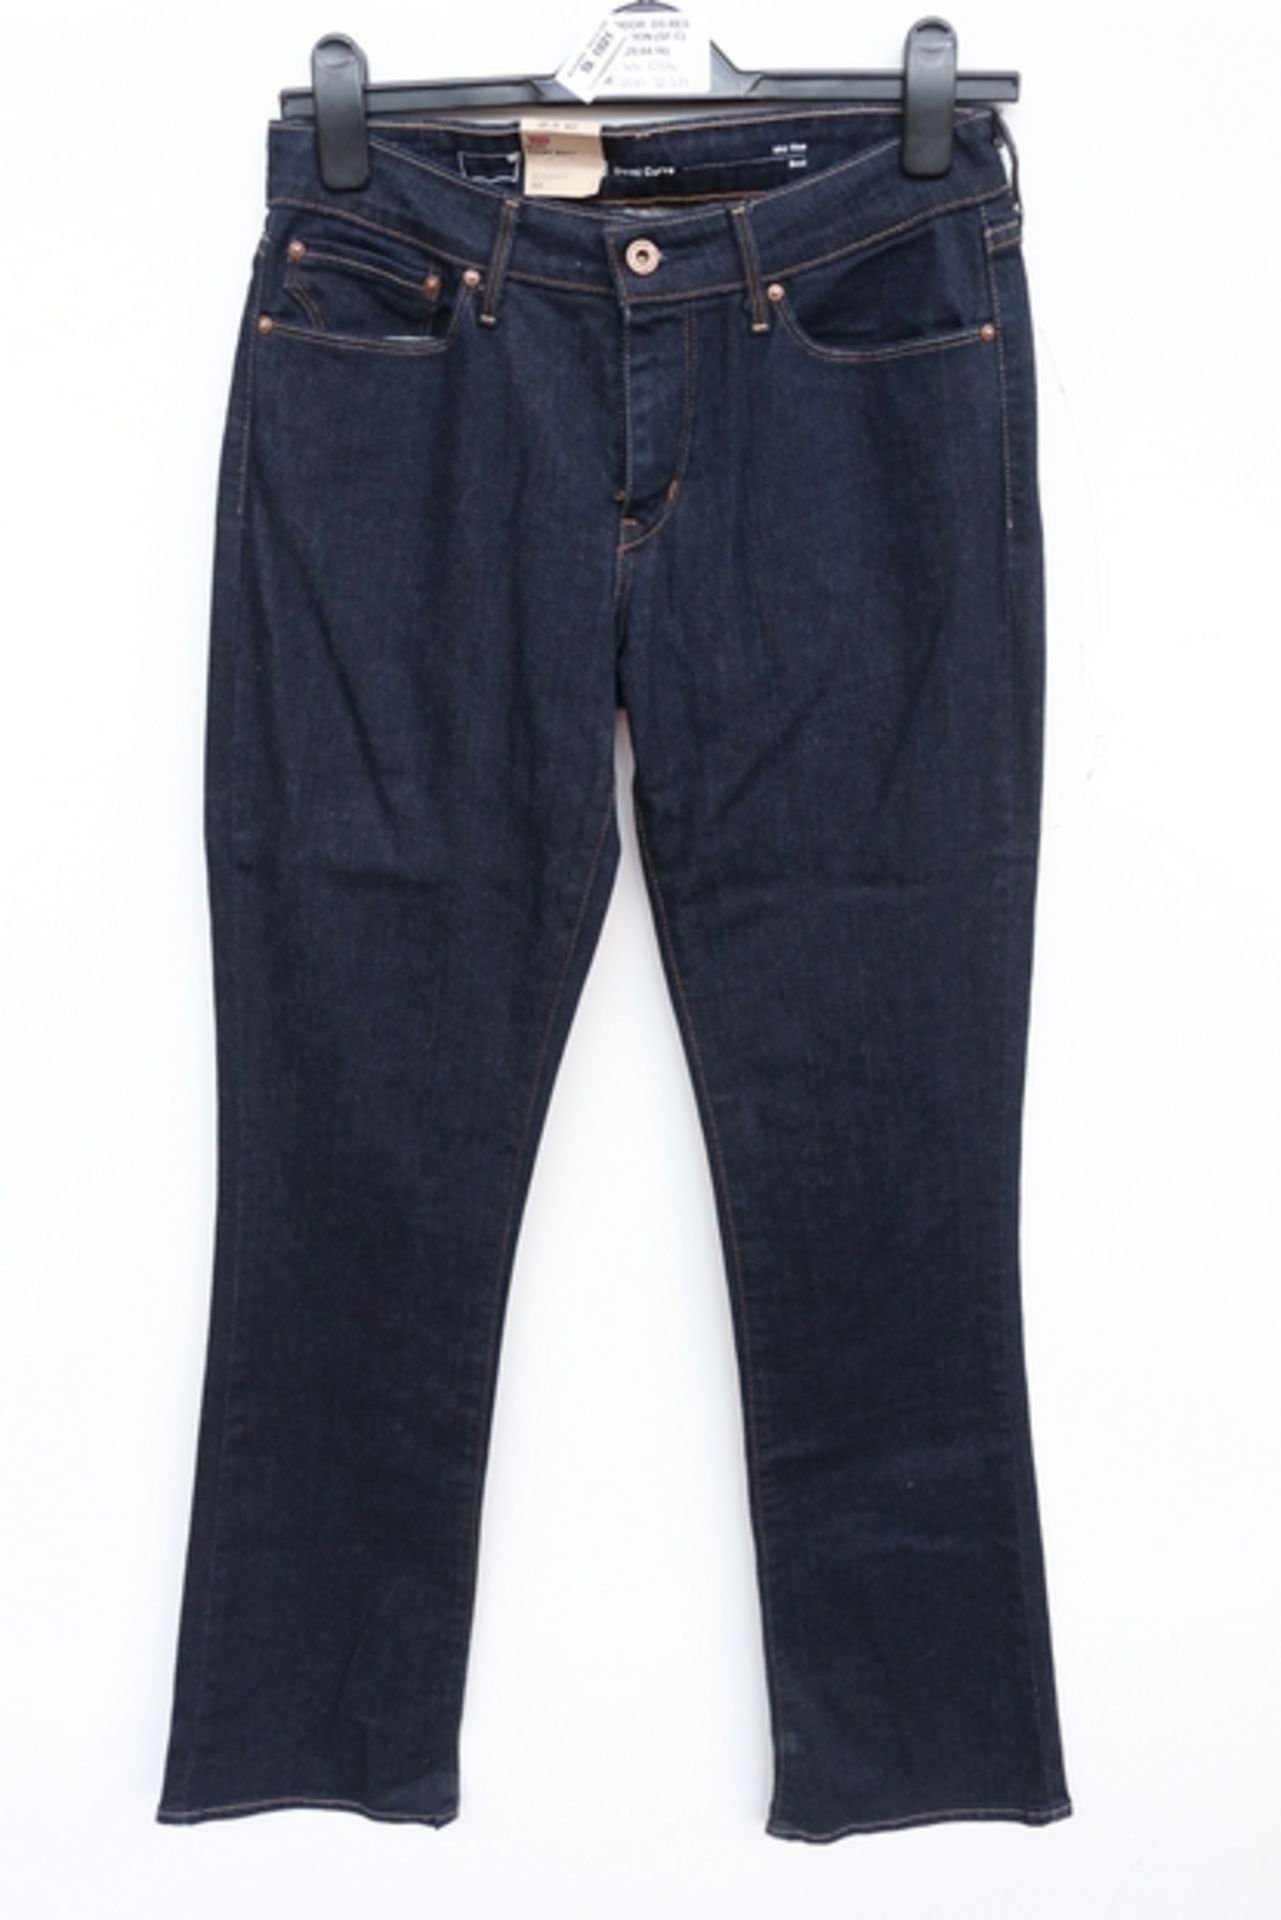 1X BRAND NEW PAIR OF LEVIS JEANS SIZE 28 X 32 RRP £80 (DS-RES-FASHION) (SF-C) (44.064) 20032371